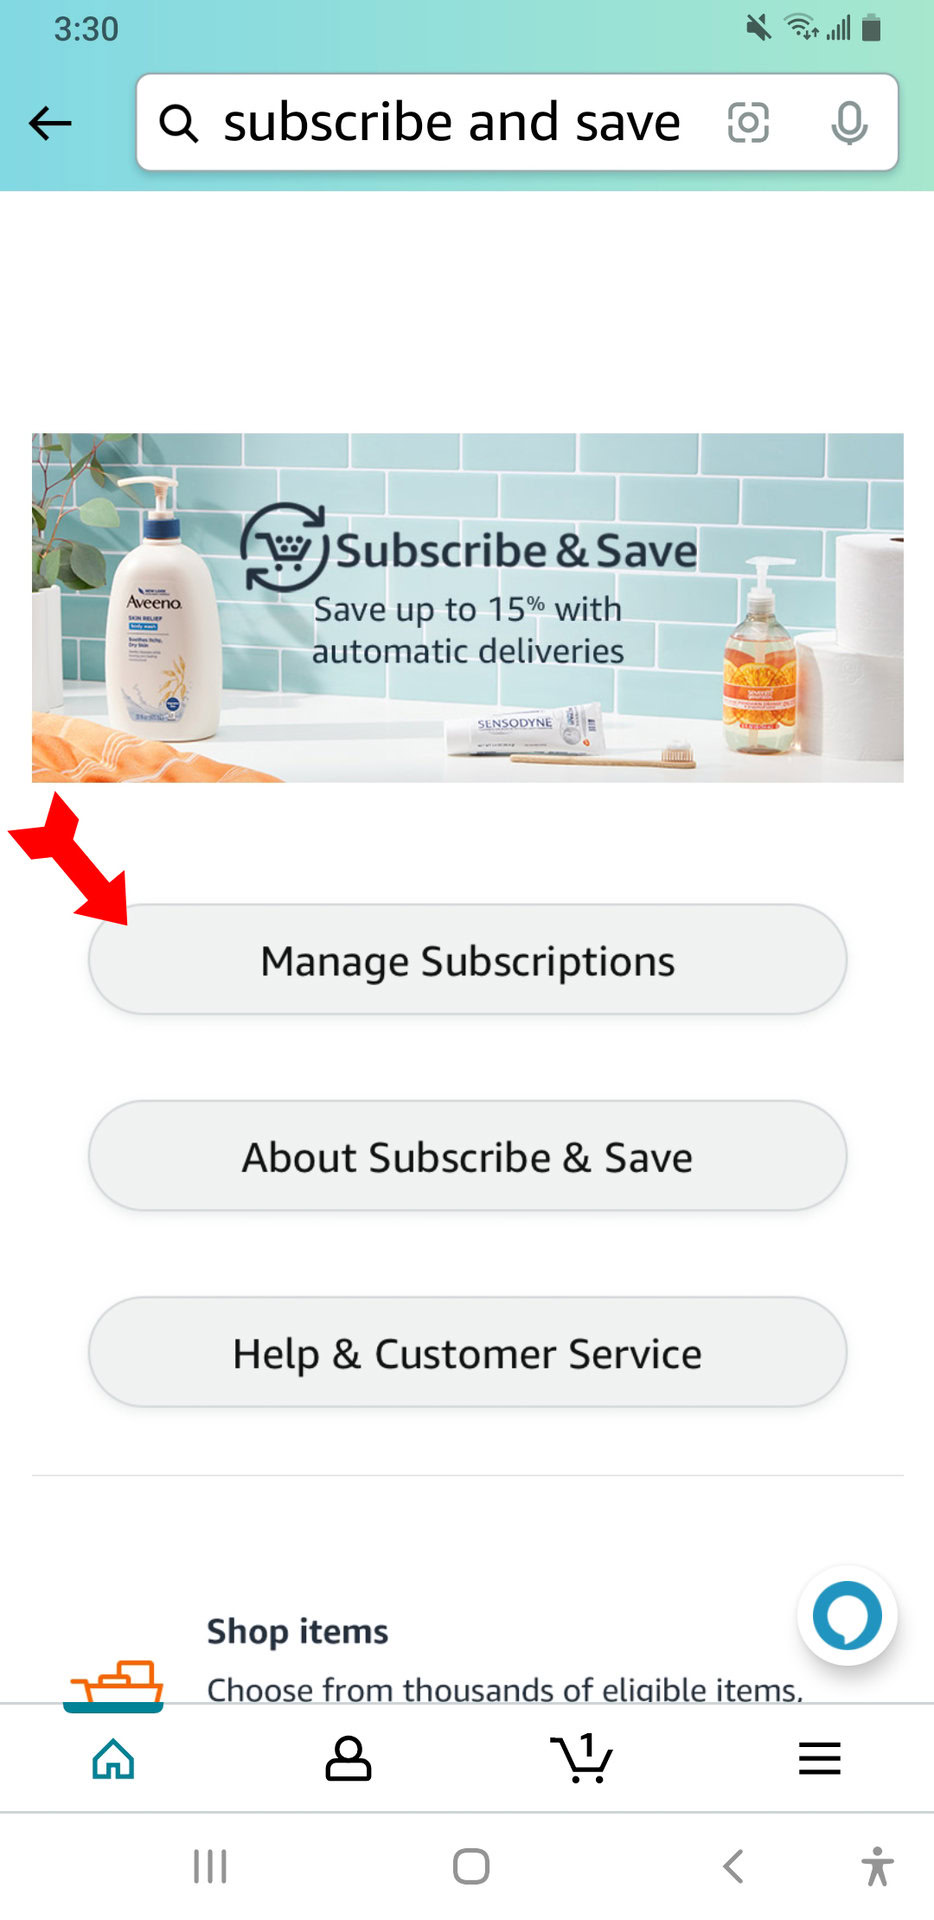 https://www.androidauthority.com/wp-content/uploads/2022/09/Cancel-Subscribe-and-Save-App-Manage-Subscriptions.jpg